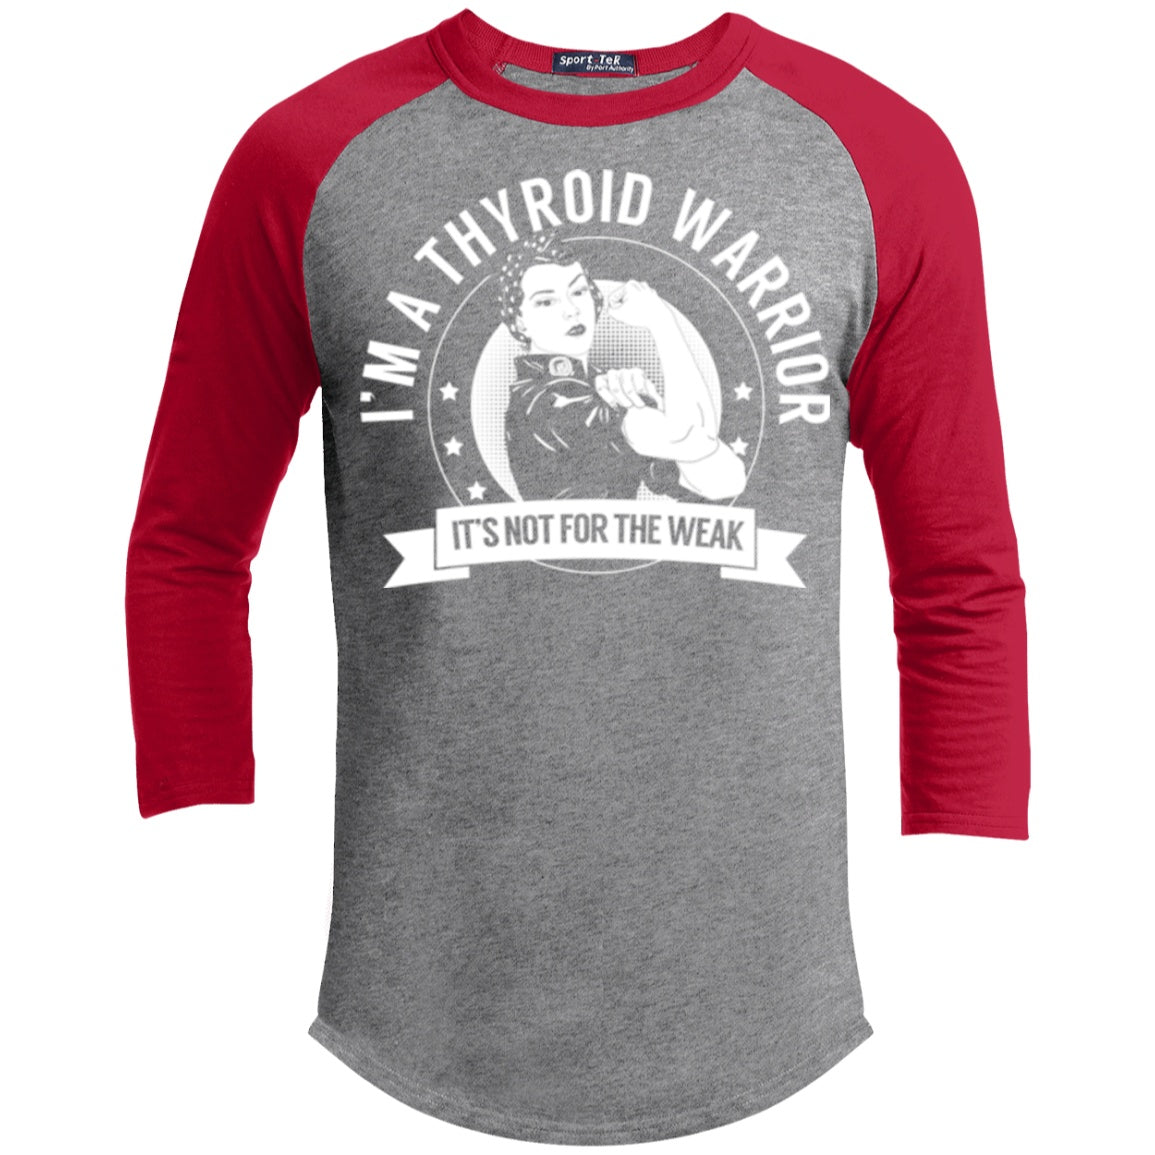 Thyroid Disease - Thyroid Warrior Not For The Weak Baseball Shirt - The Unchargeables